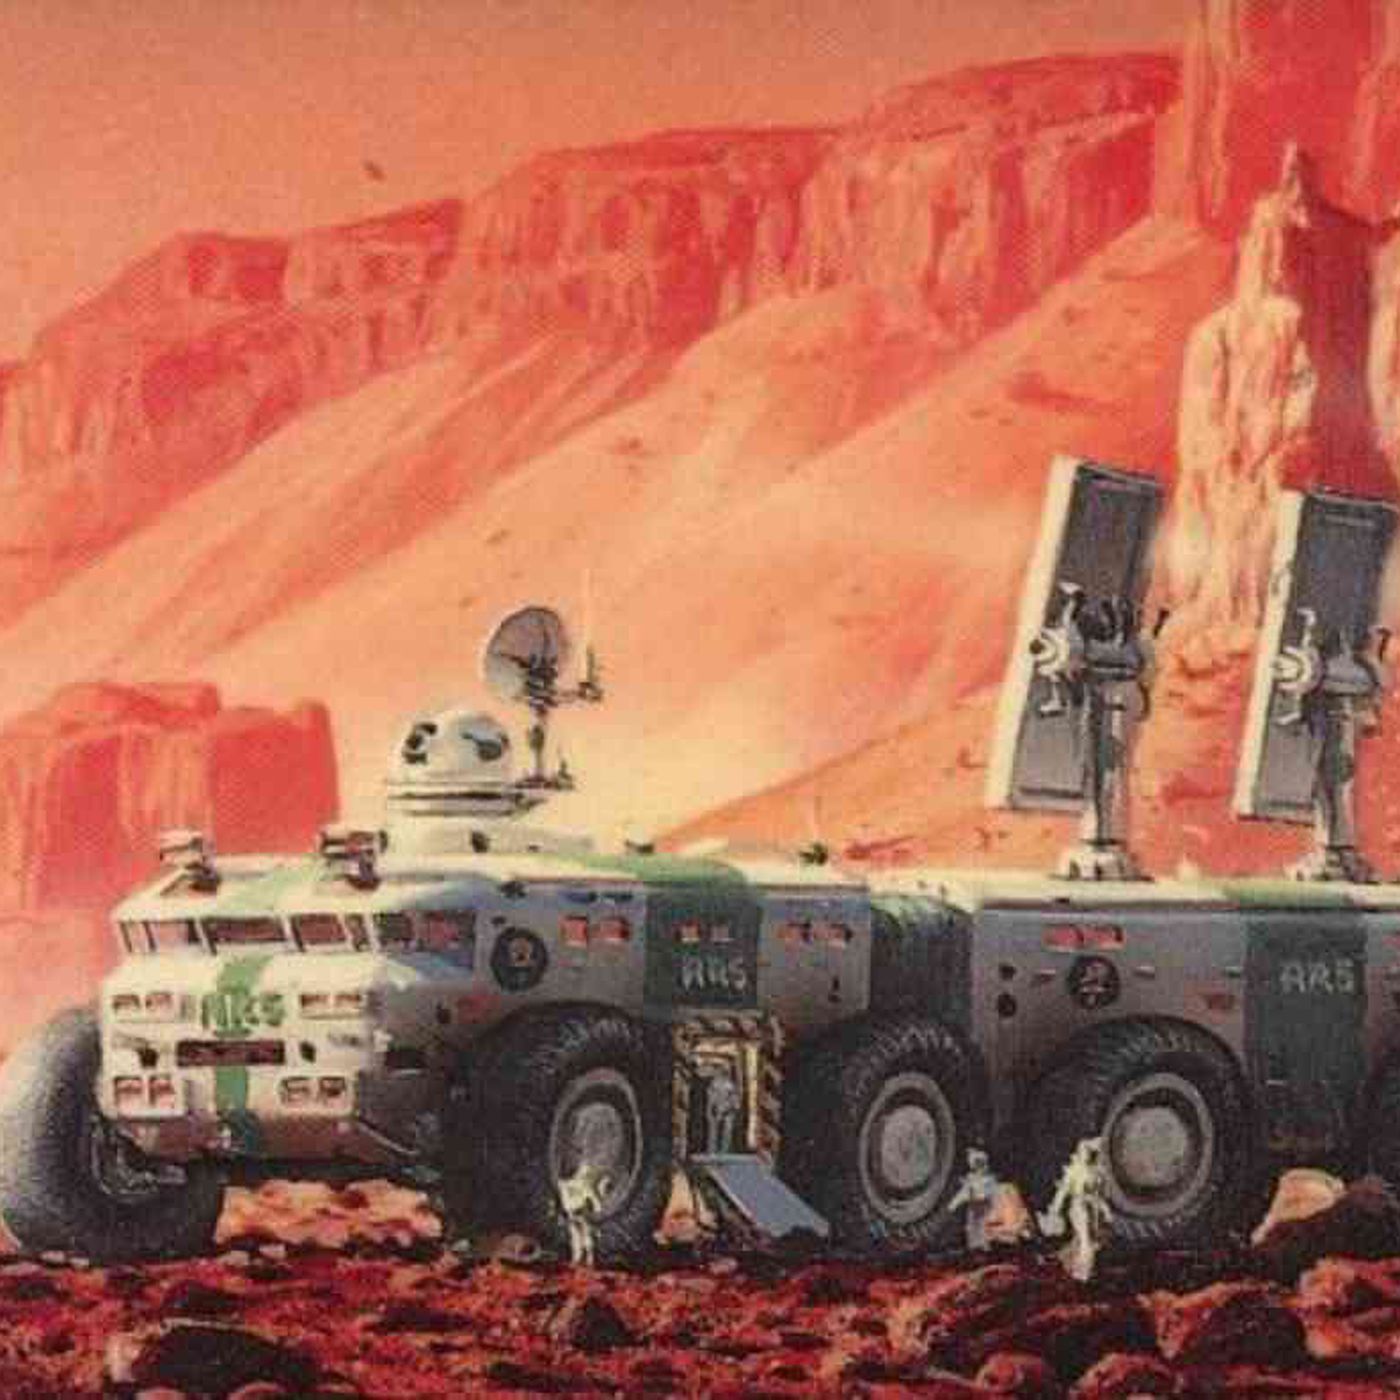 How science fiction has imagined colonizing our Solar System and beyond